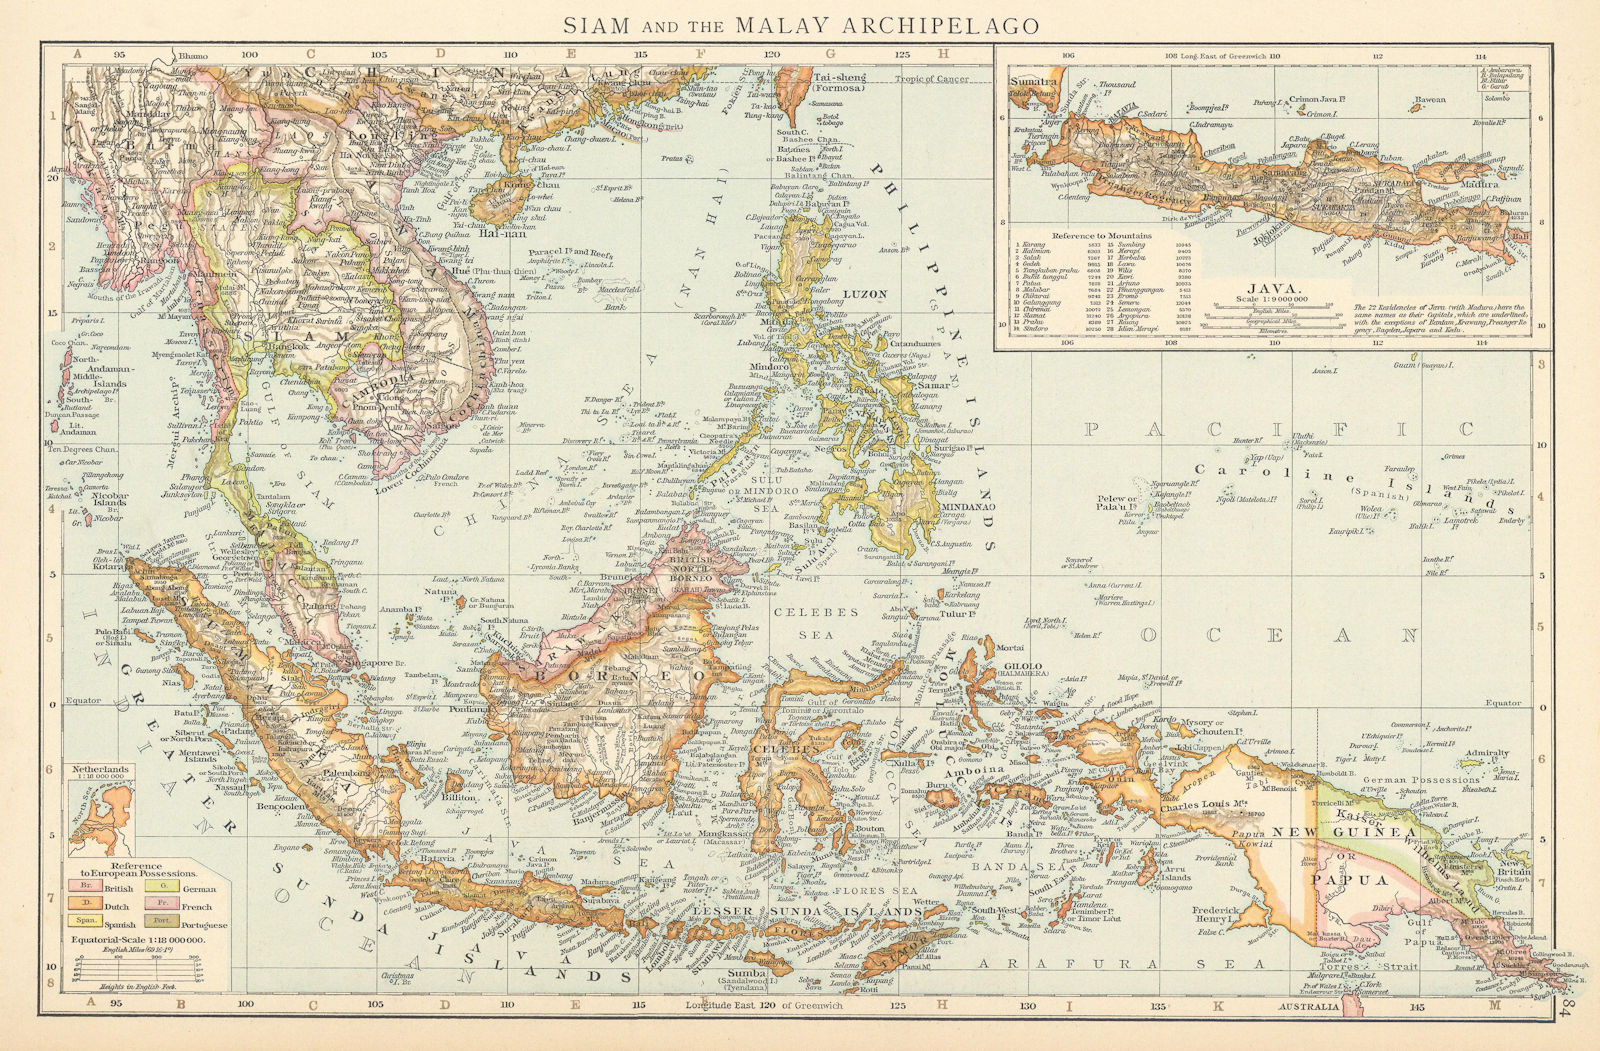 Siam and the Malay Archipelago. Indonesia Indochina Philippines. TIMES 1895 map